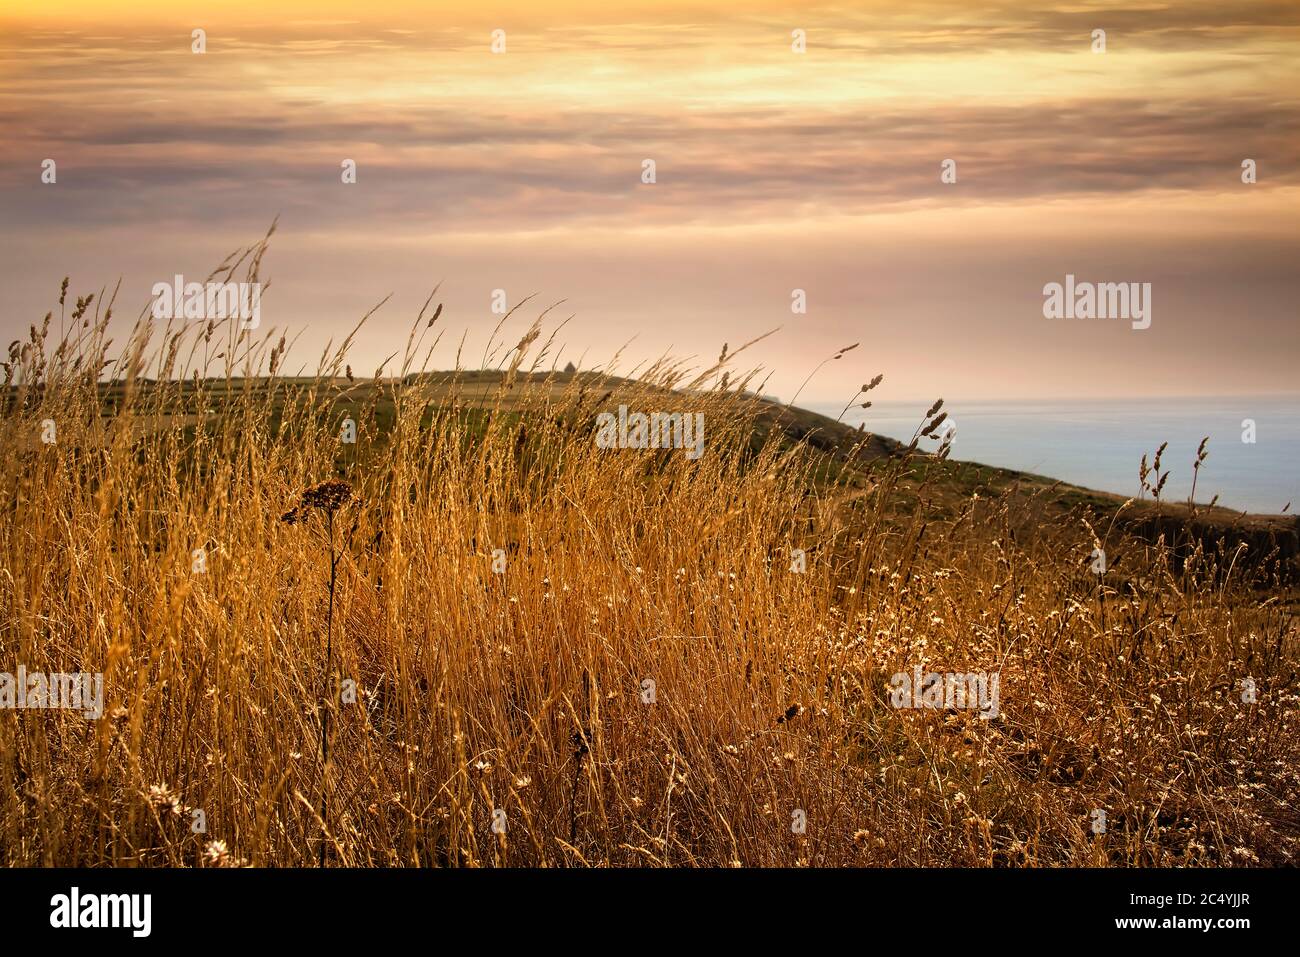 The wheat and natural countryside of Guernsey, UK Stock Photo